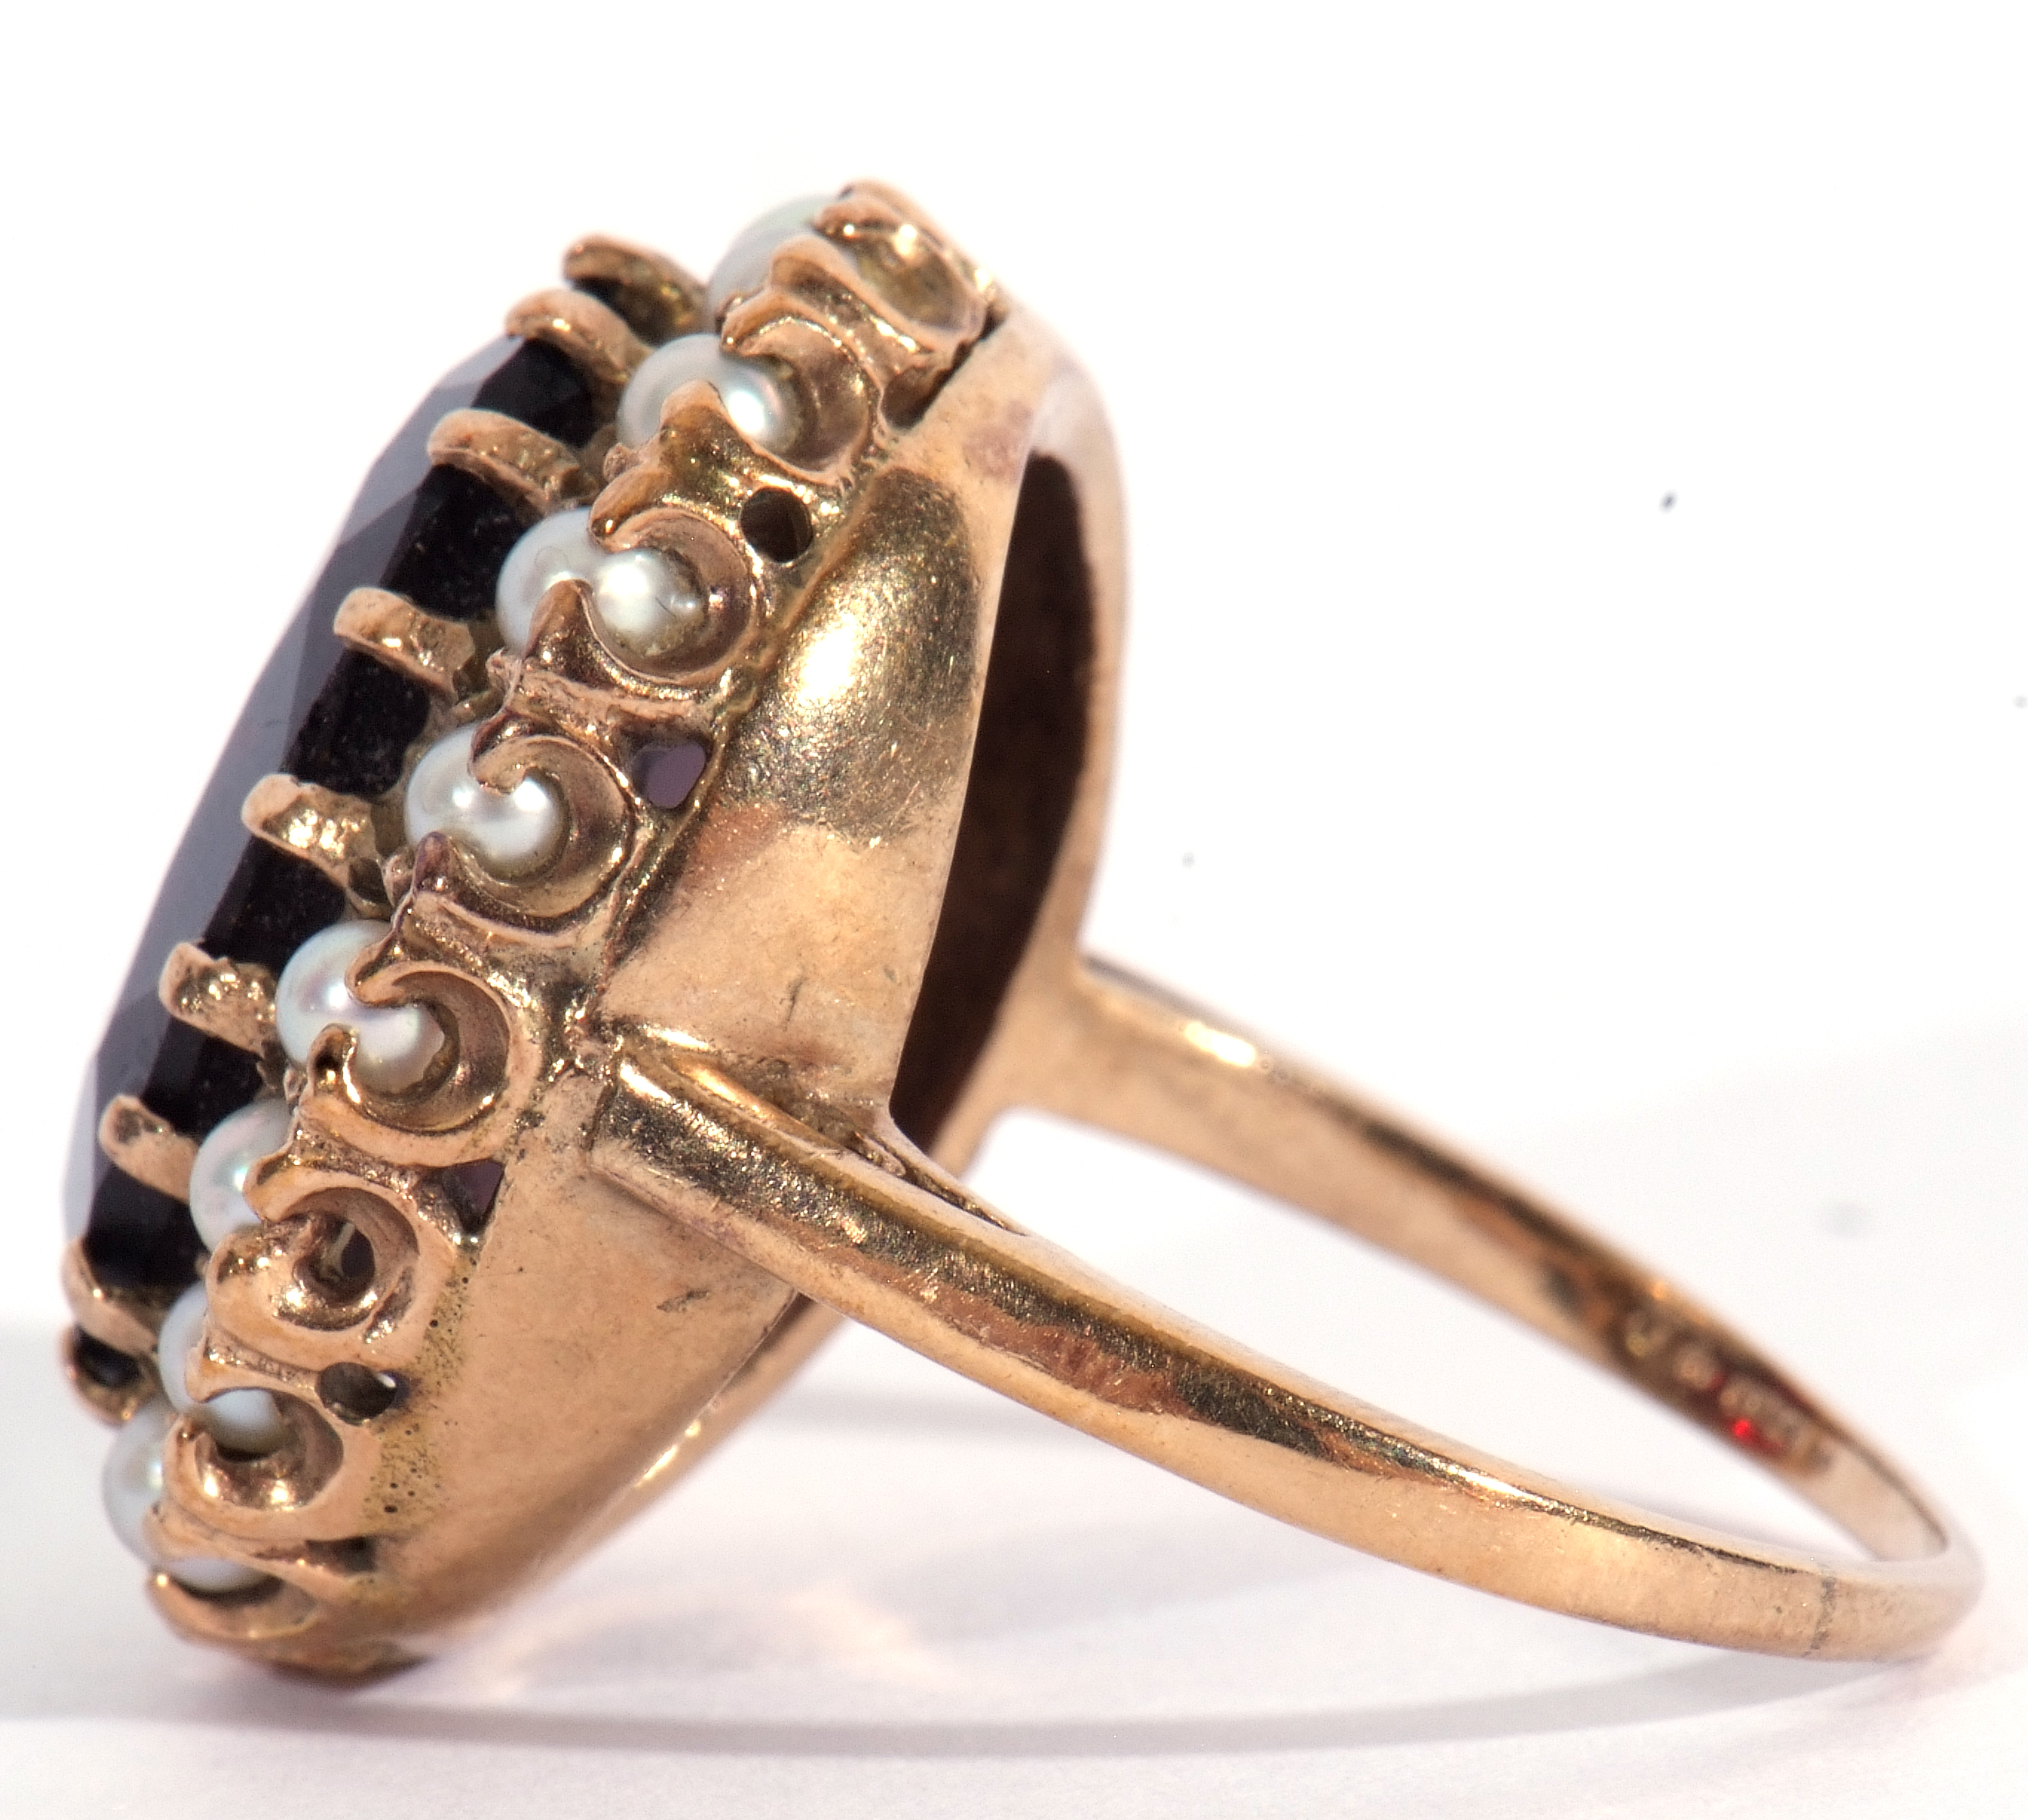 Modern 9ct gold dress ring, a large red paste faceted stone, 18 x 12mm, within a seed pearl - Image 4 of 9